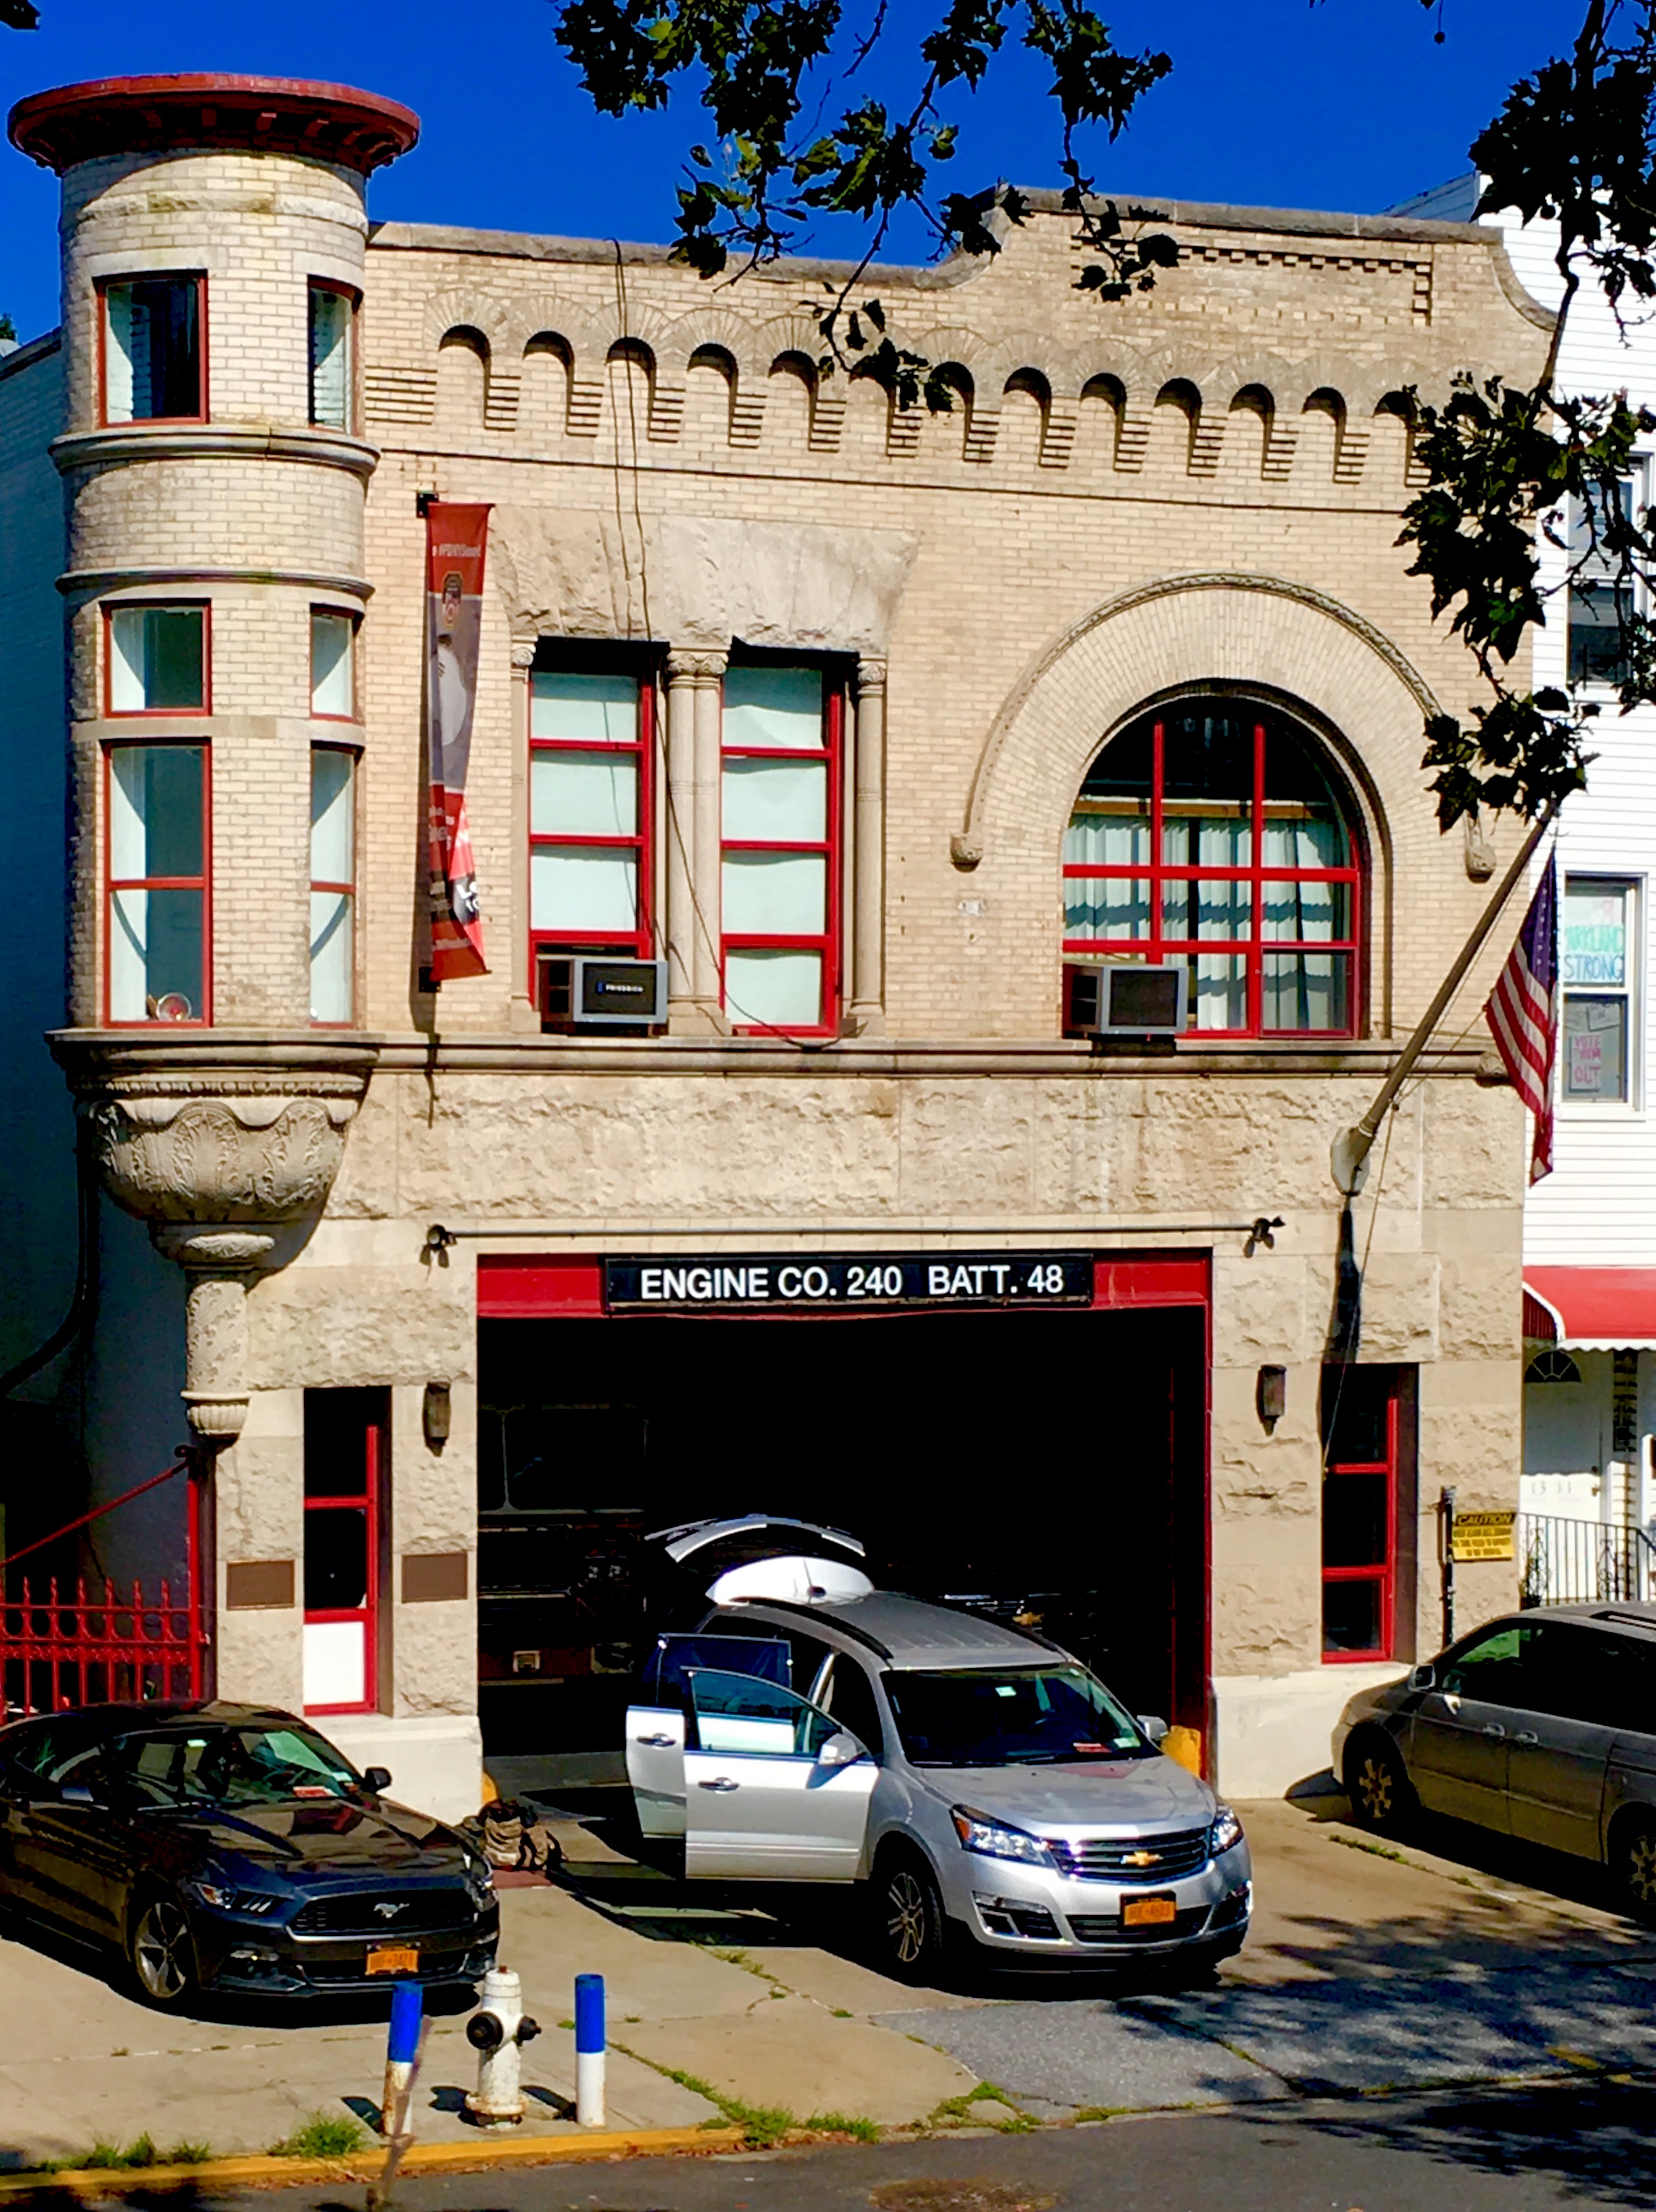 This is Windsor Terrace’s landmarked firehouse. Eagle photo by Lore Croghan